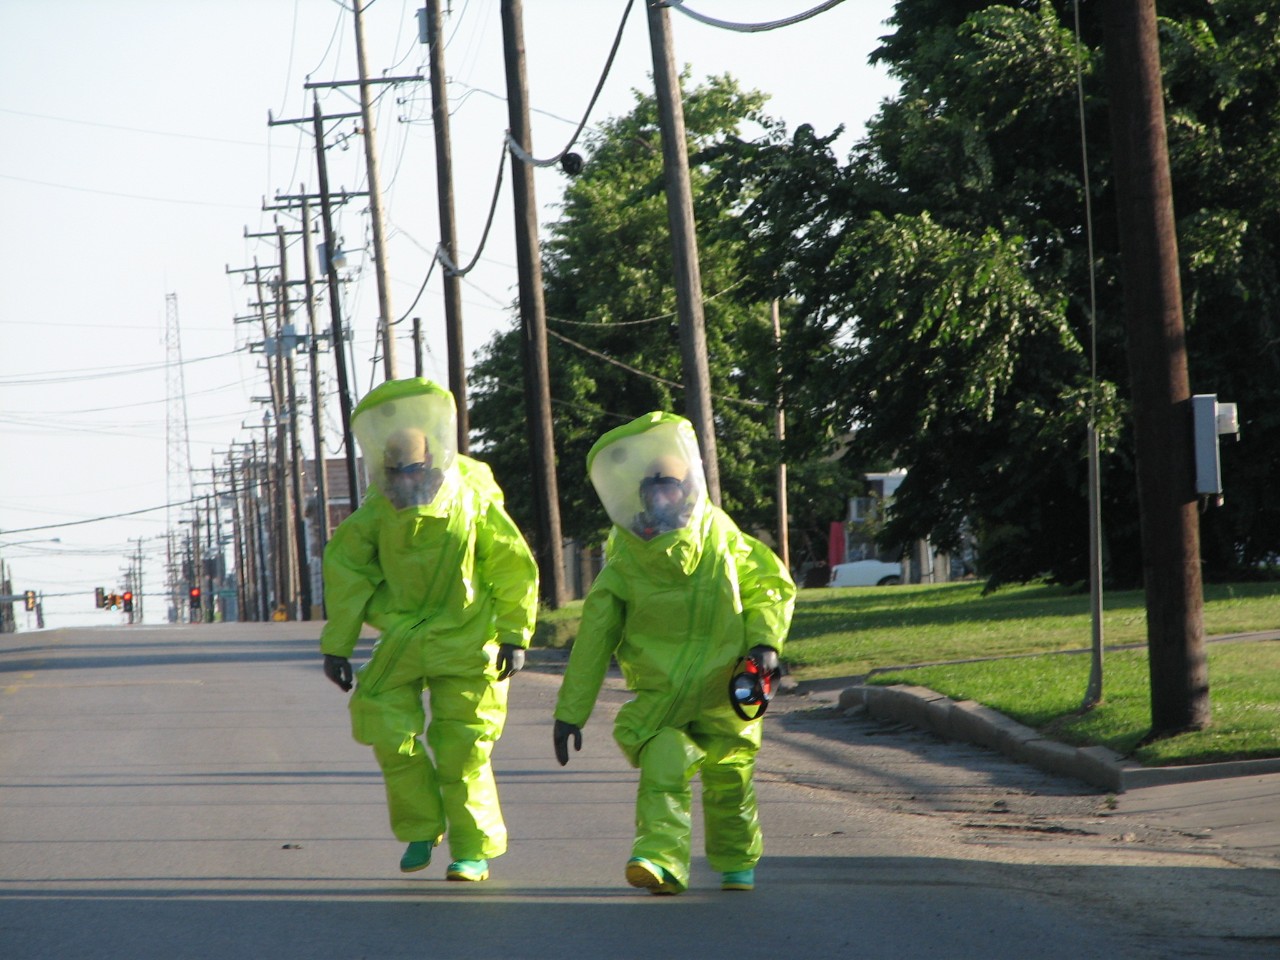 Two people in protective suits from the Muskogee RRS team